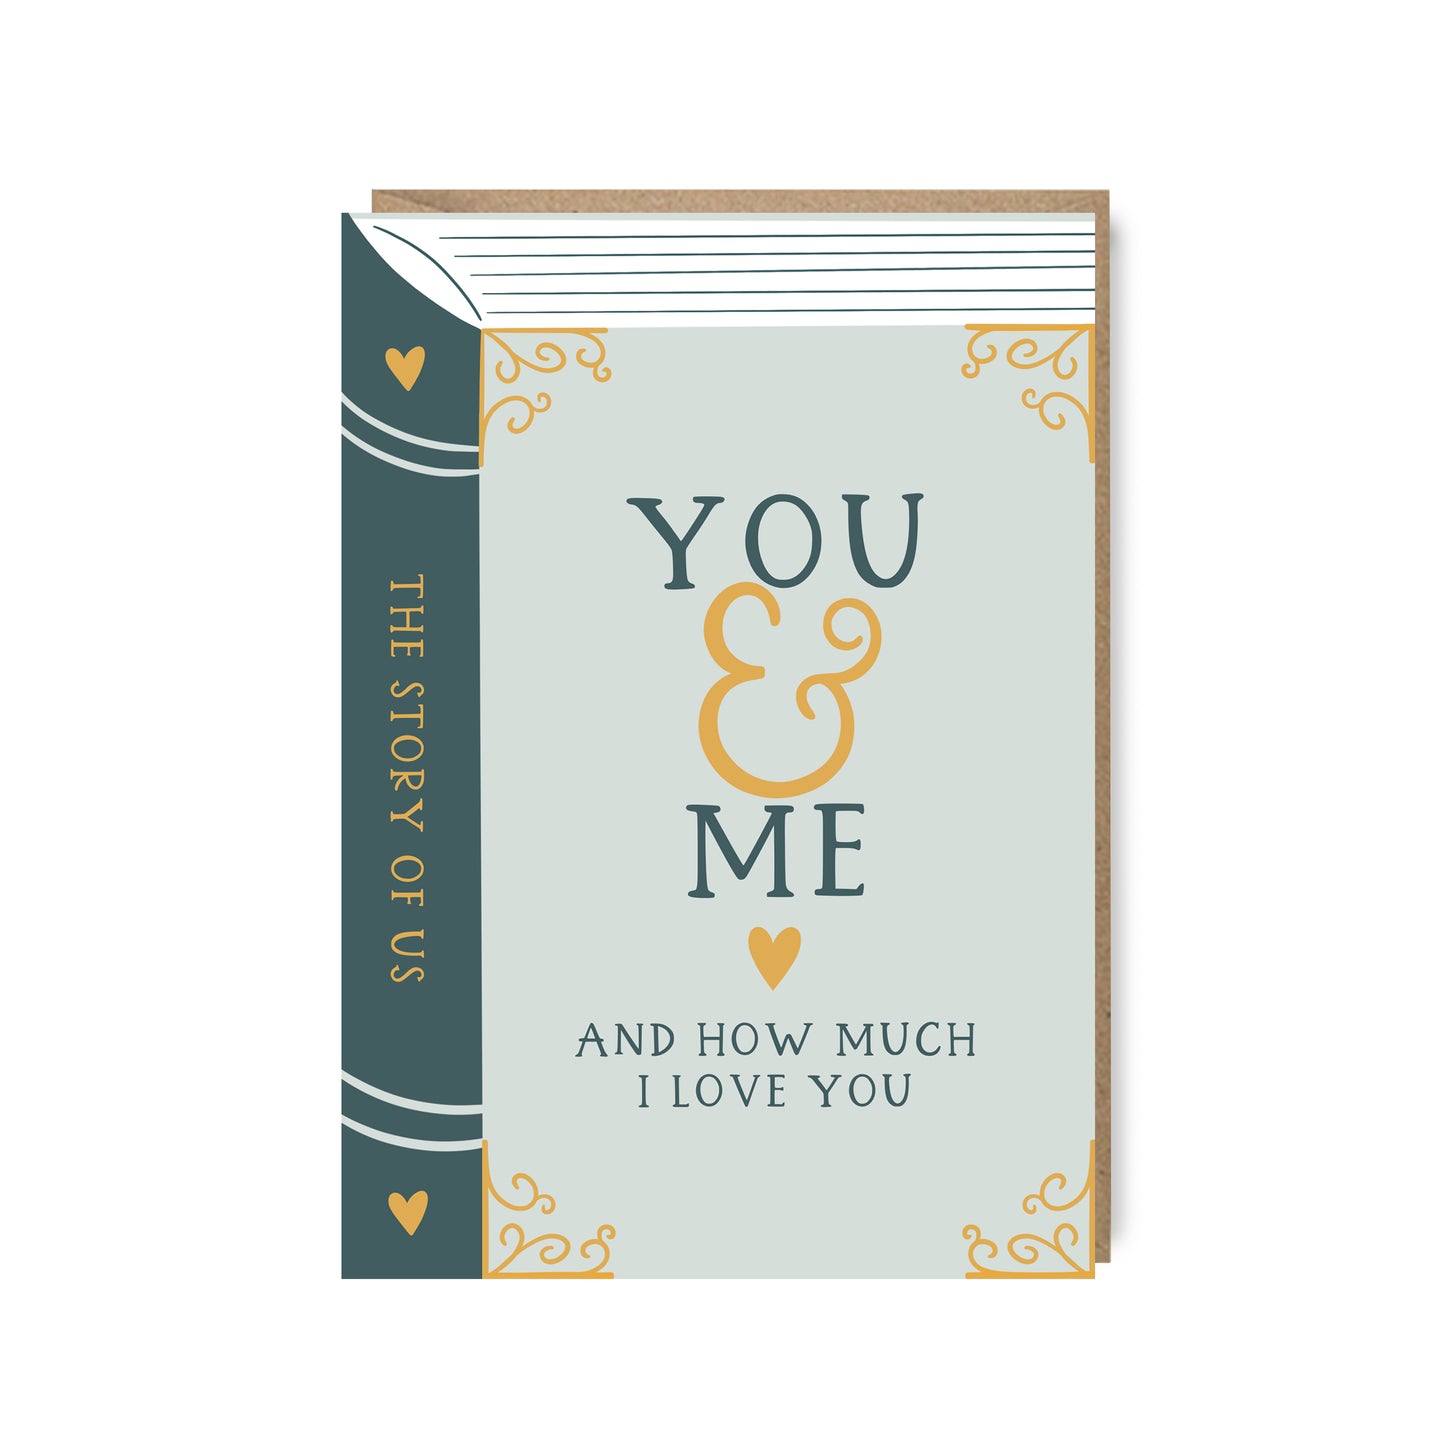 You and Me and how much I love you book style anniversary card by abbie imagine